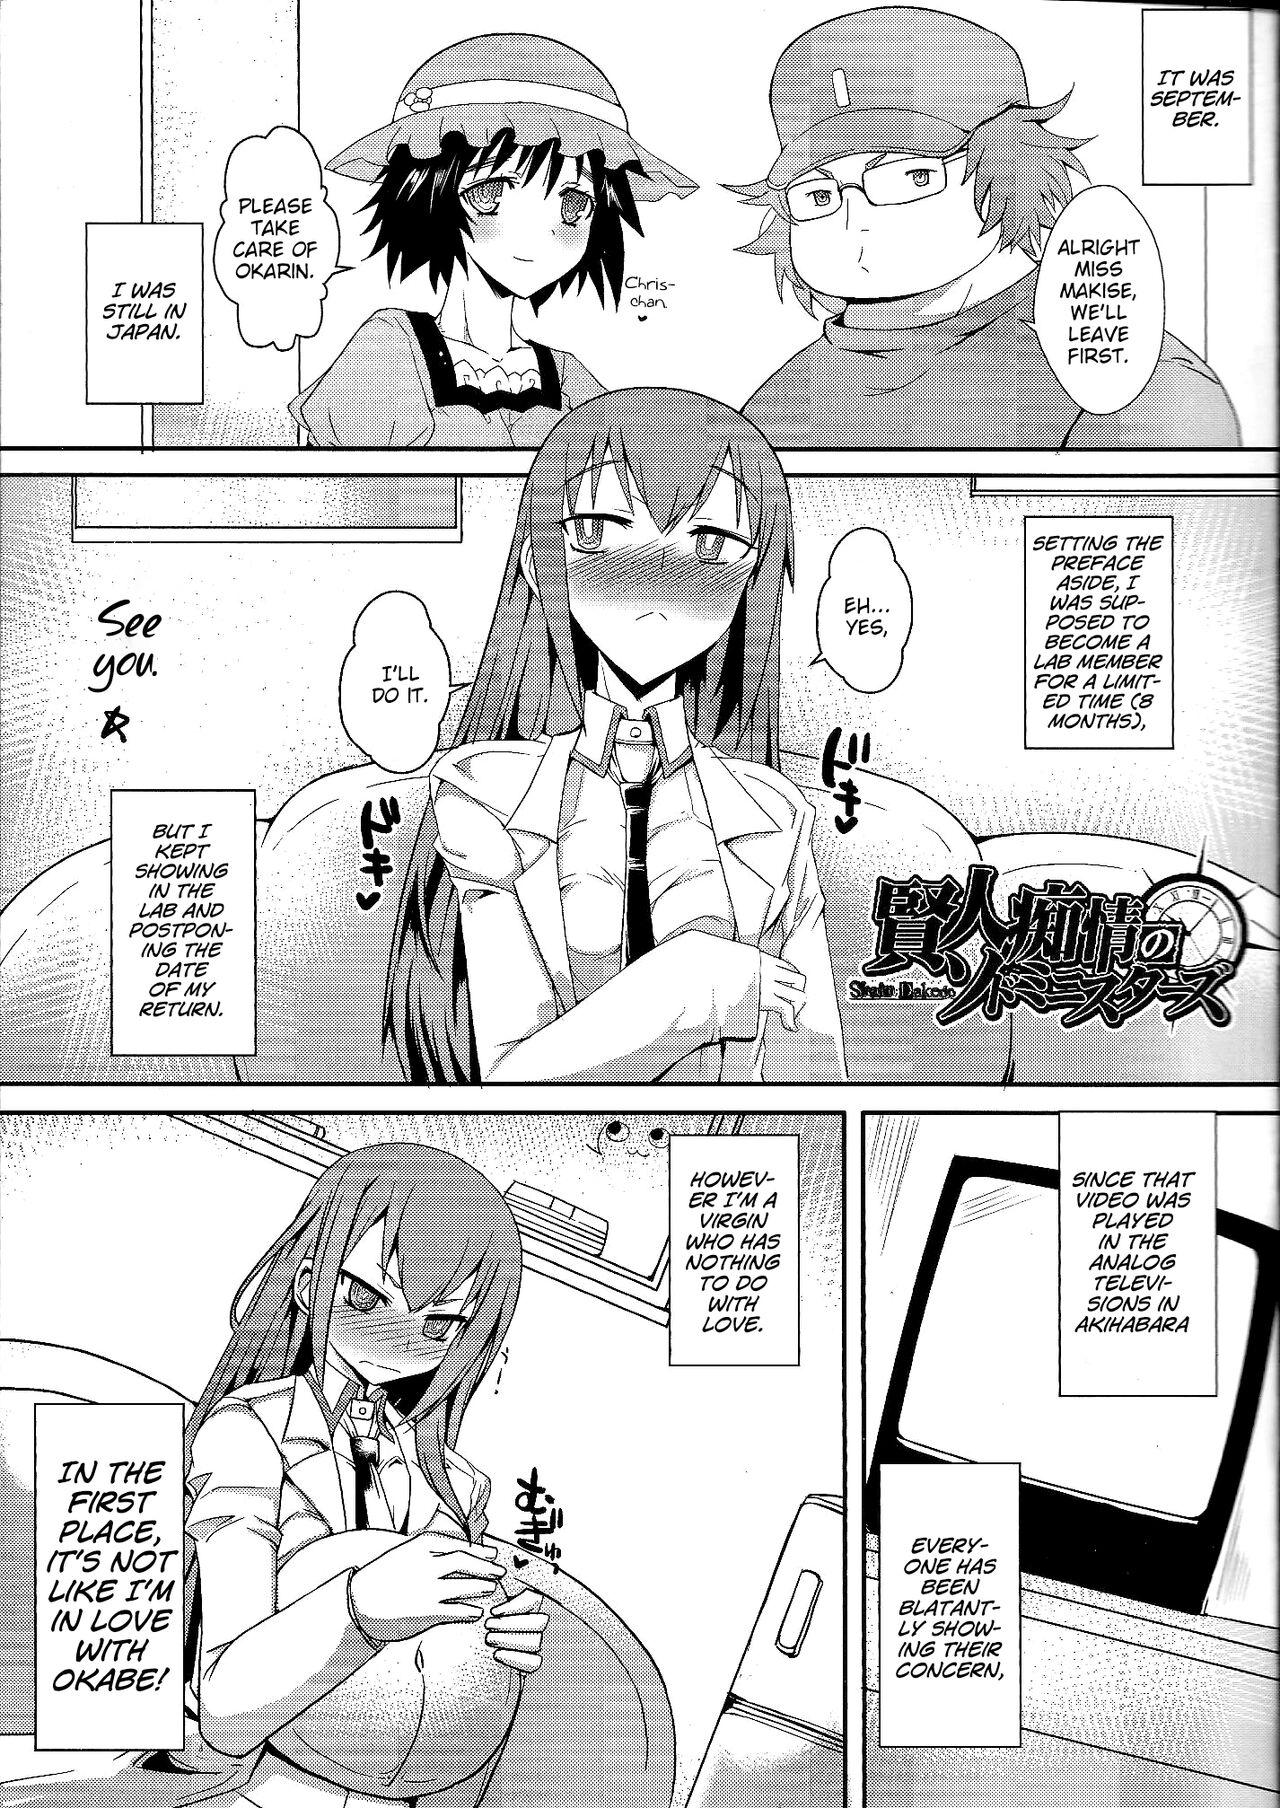 Joven Kenjin Chijou no Sodoministers - Steinsgate Tiny Girl - Page 4